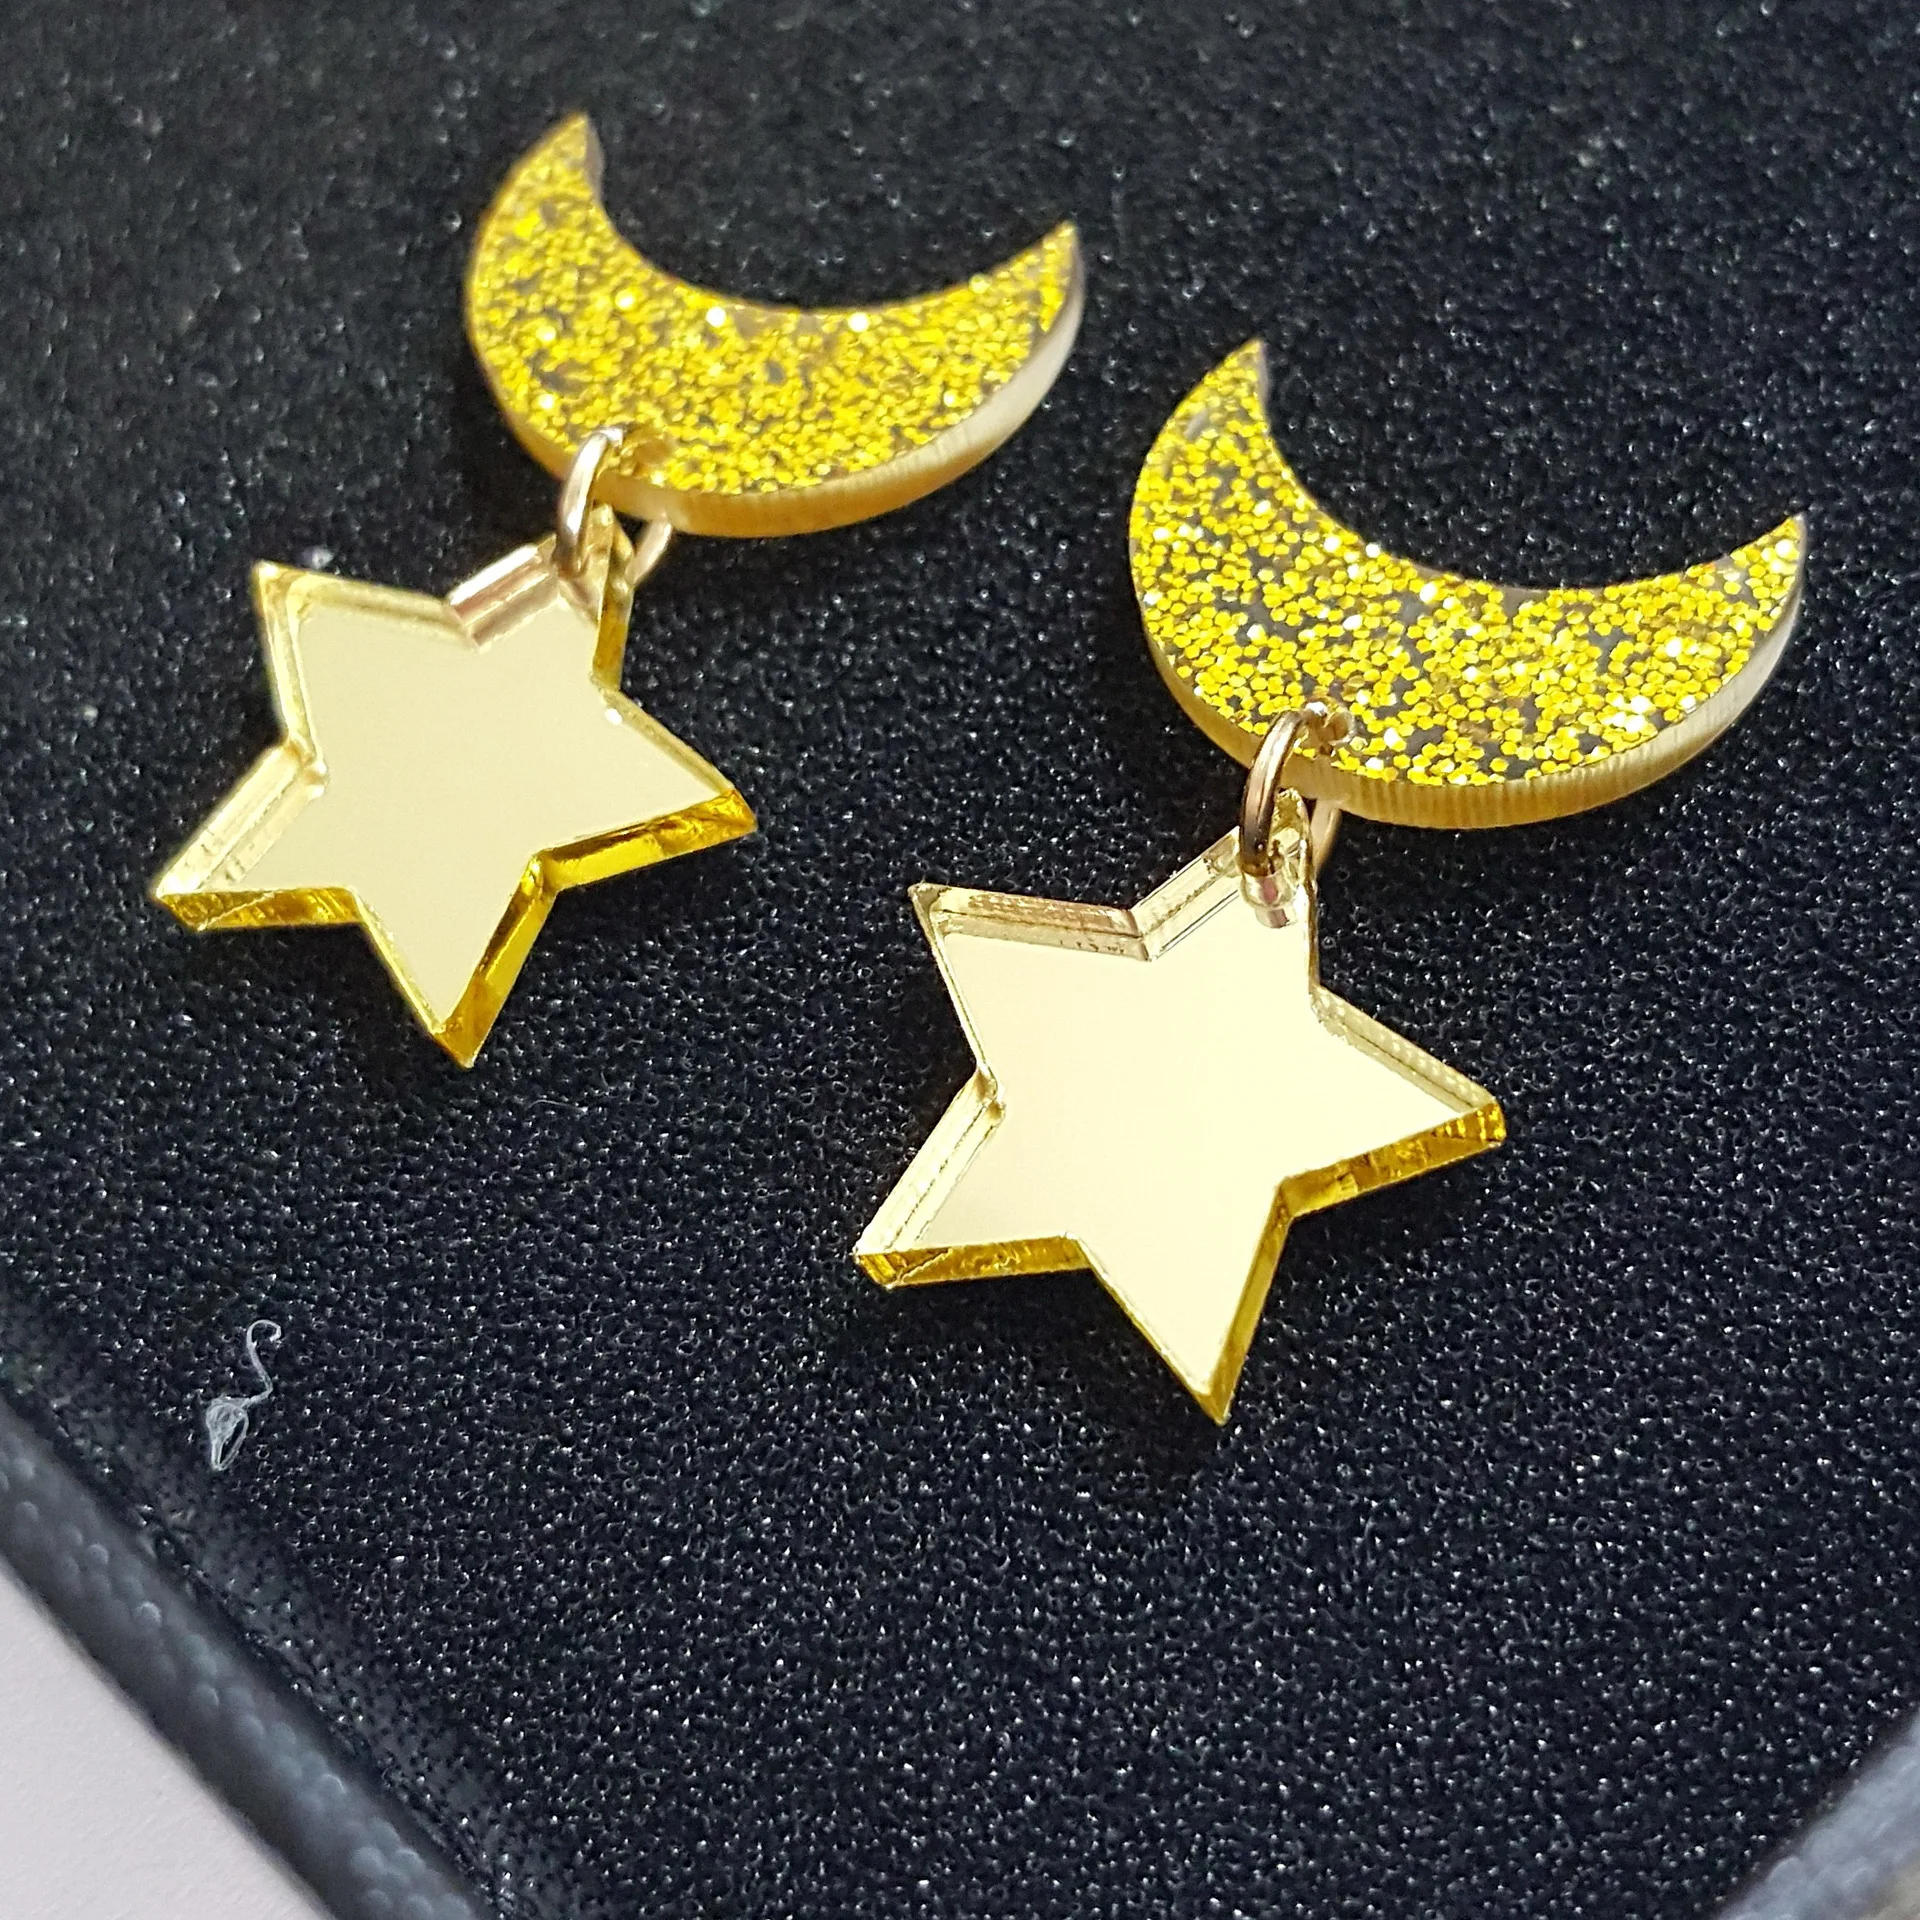 

2022 New Star and Moon Studs Earrings Senshi Costume Cosplay Jewelry Sailor Moon Earrings for Women Girls, Picture shows